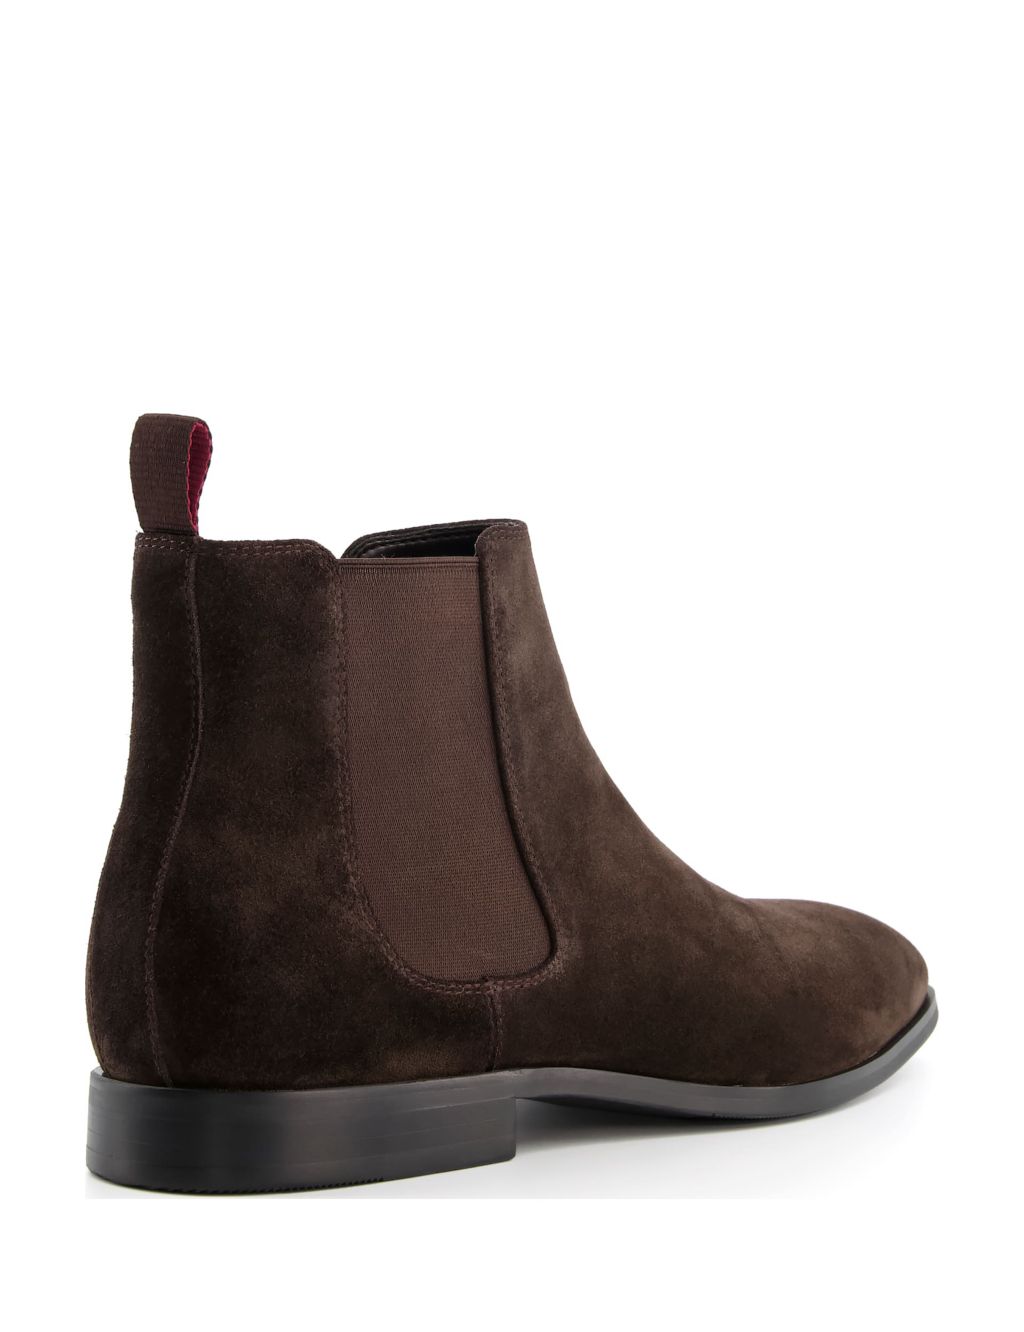 Suede Chelsea Ankle Boots image 3